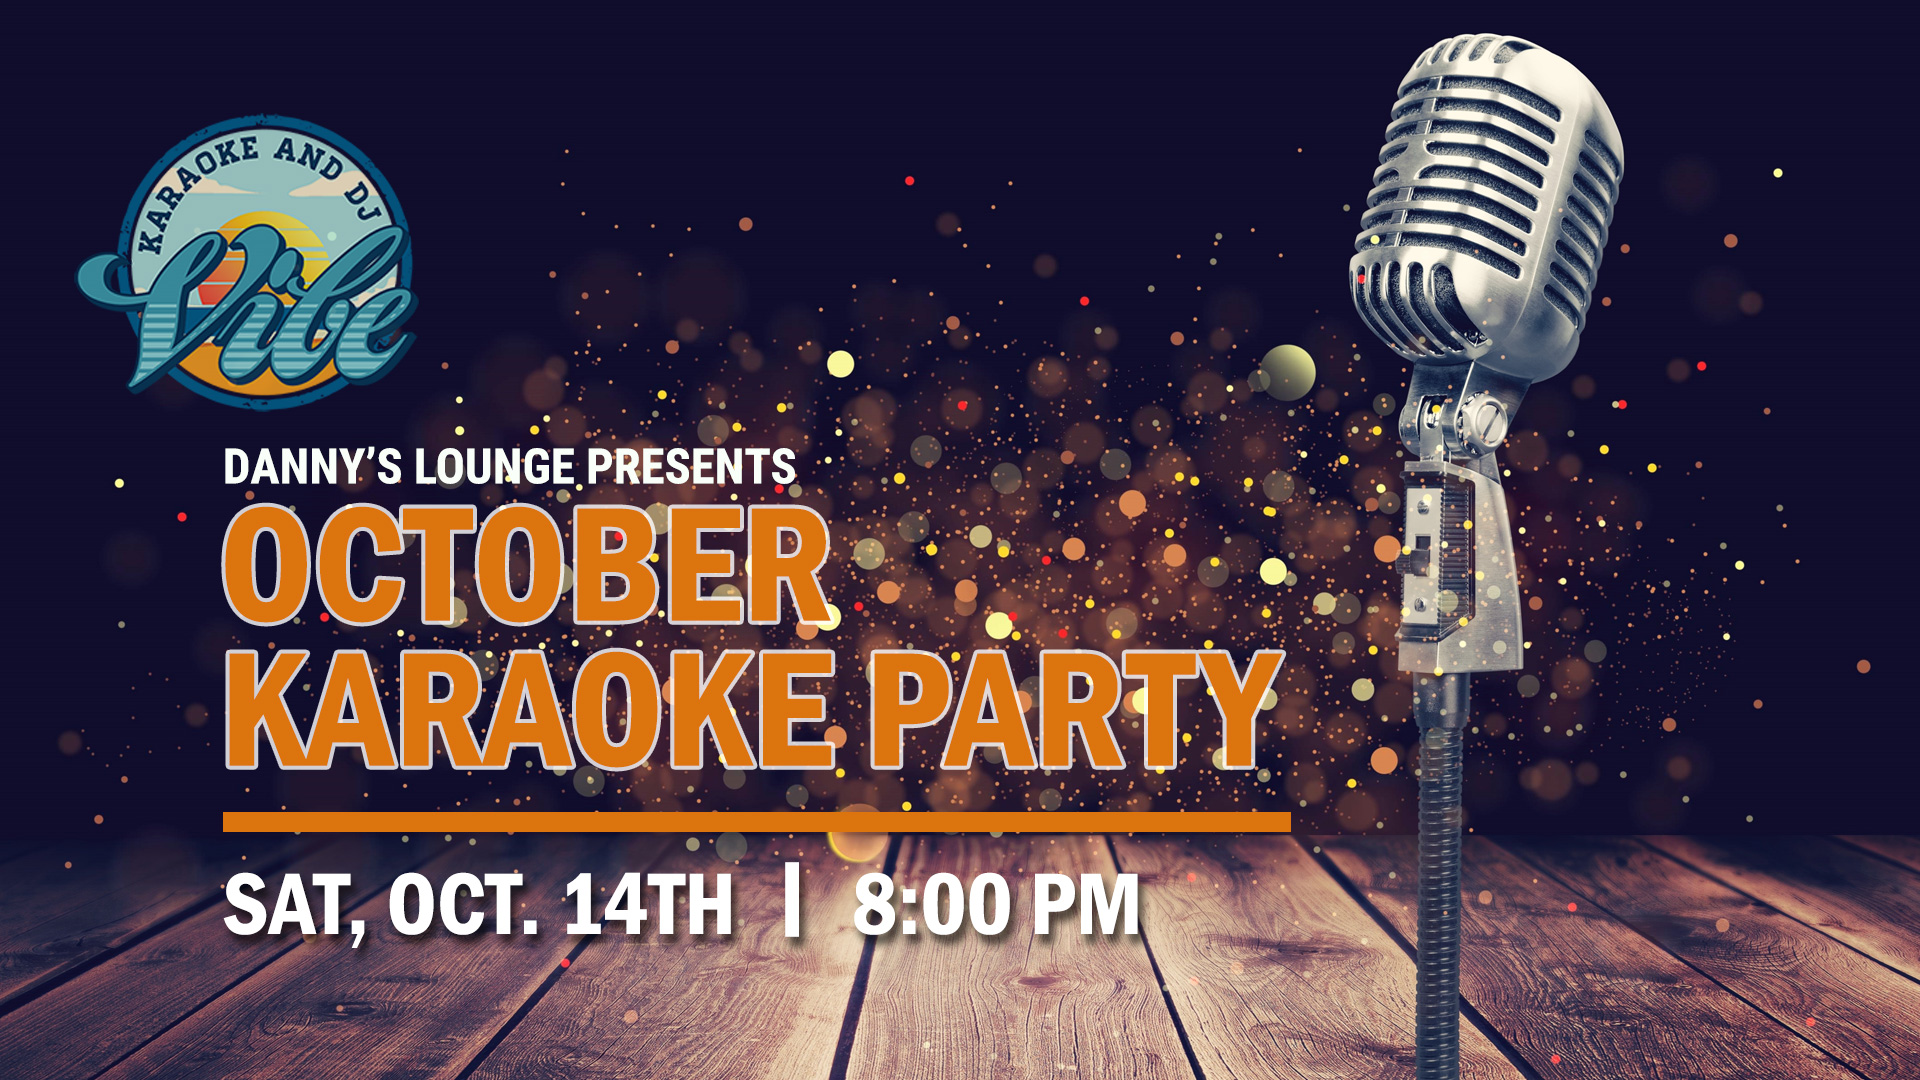 October Karaoke Party at Danny’s Lounge